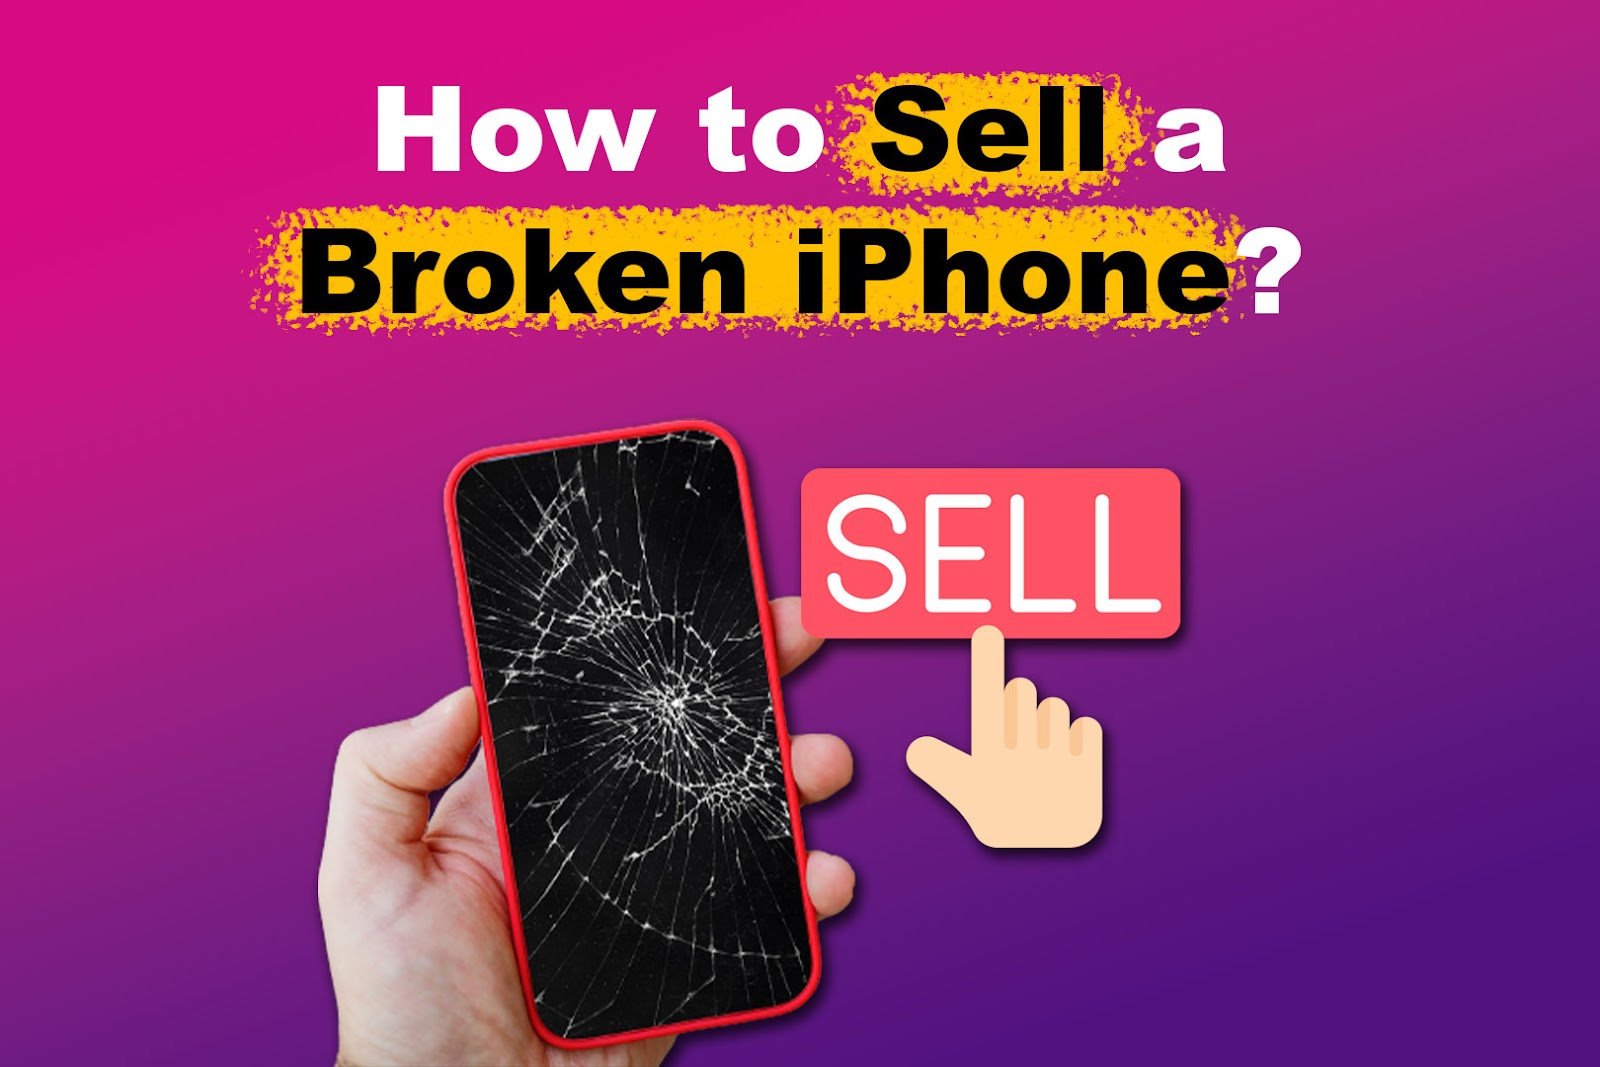 How to Sell a Broken iPhone